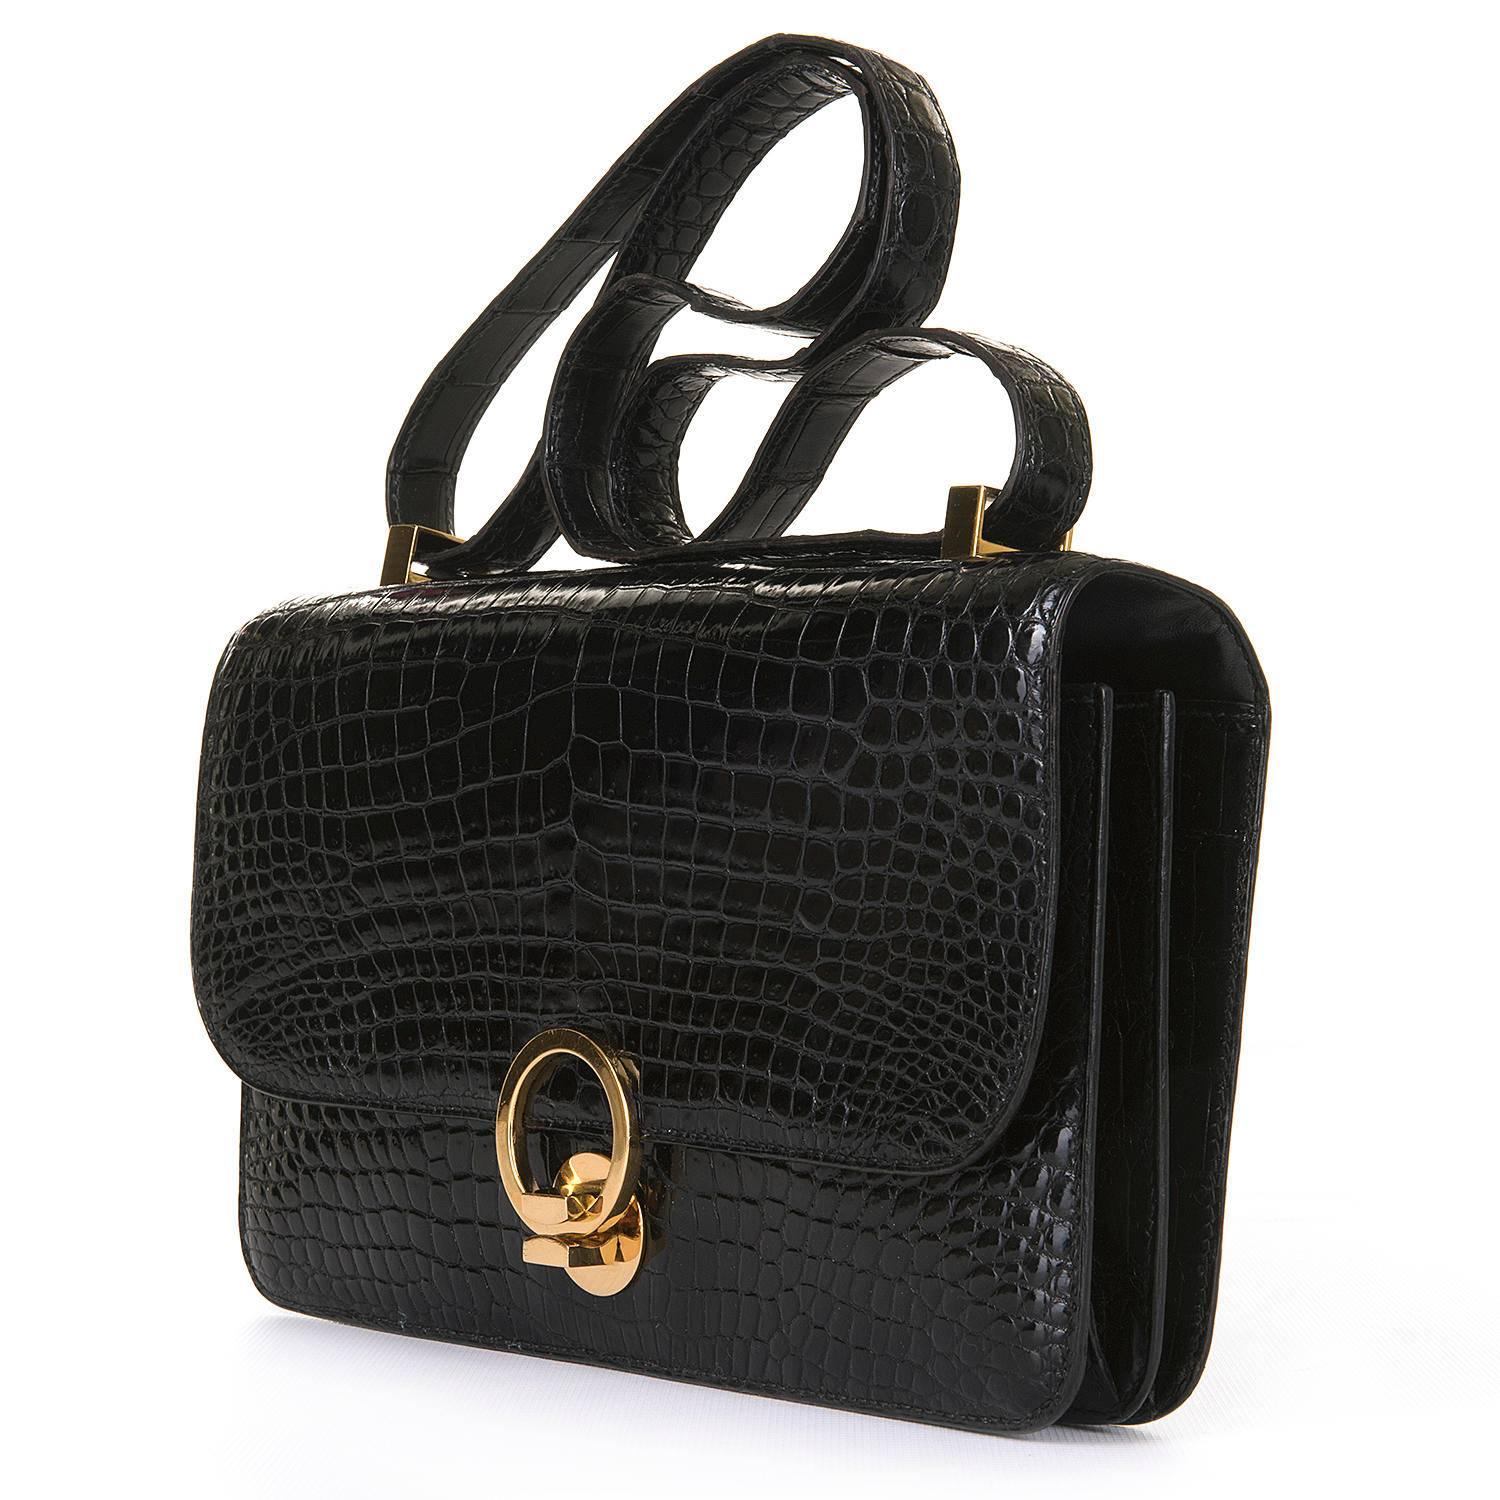 An Absolutely Stunning Vintage Hermes 'Sac Ring' Shoulder Bag finished in Black Crocodile with Gold Hardware. This rare Hermes Bag was styled on the coveted Hermes Constance bag and is the same size and shape with an identical 'Double-up' Shoulder